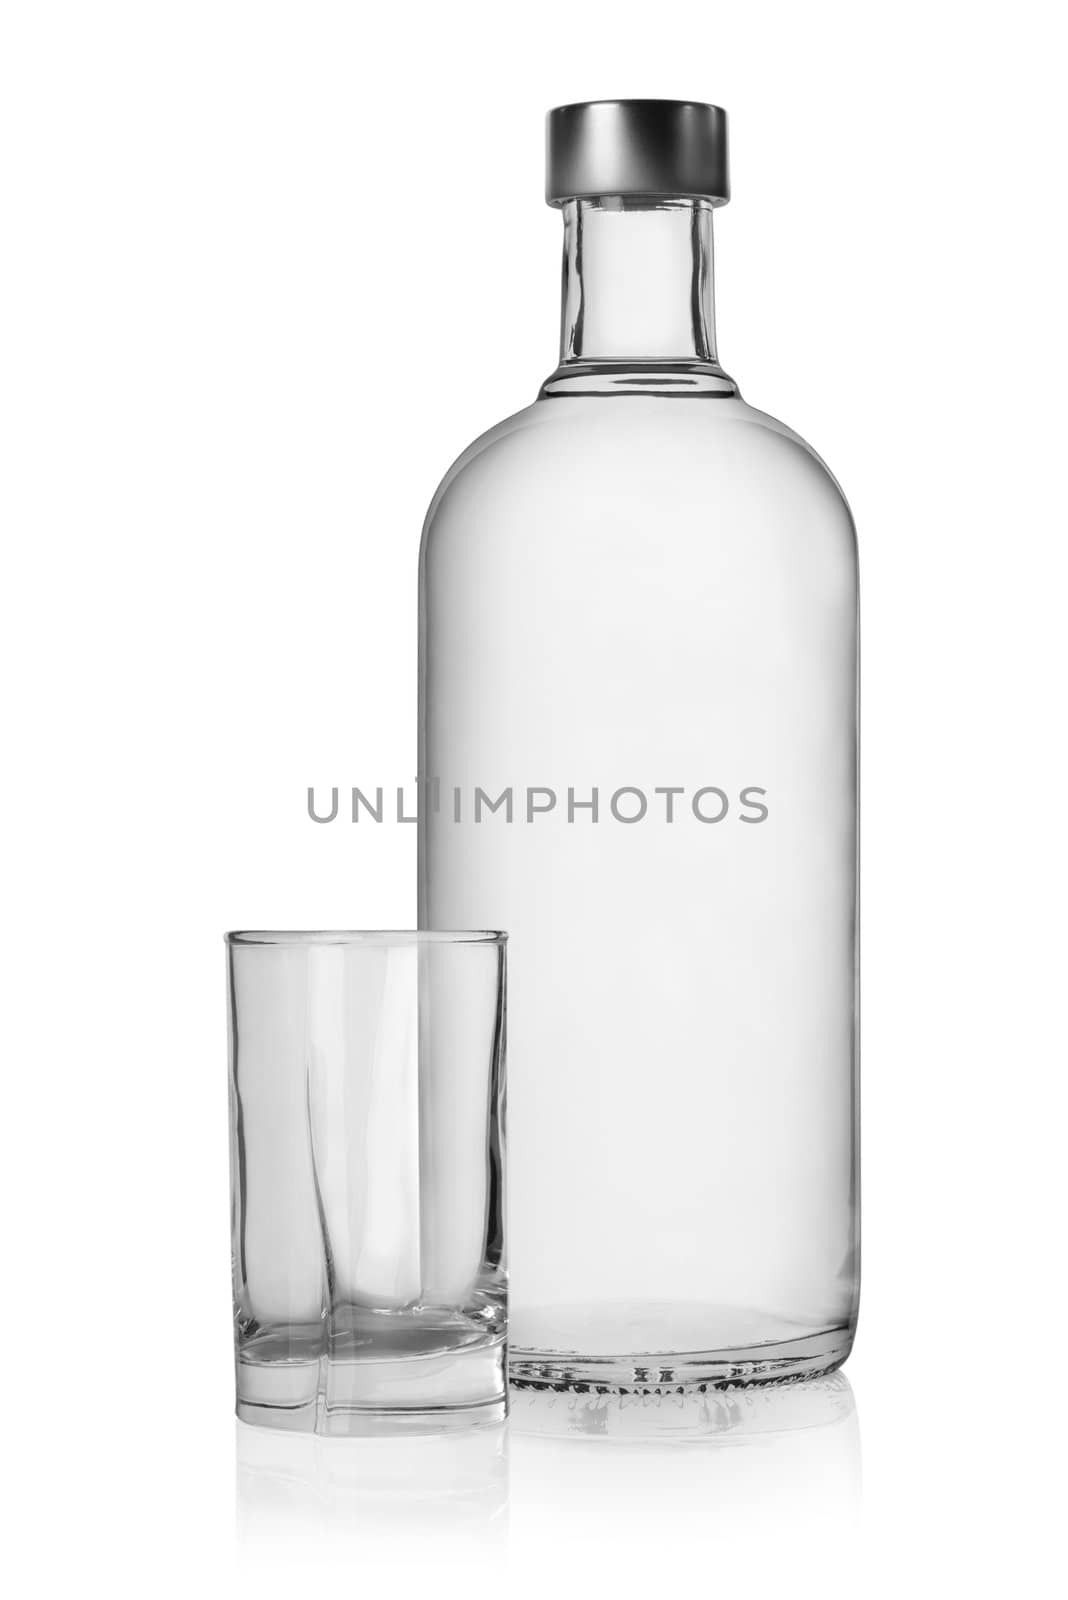 Bottle and glass of vodka isolated on a white background